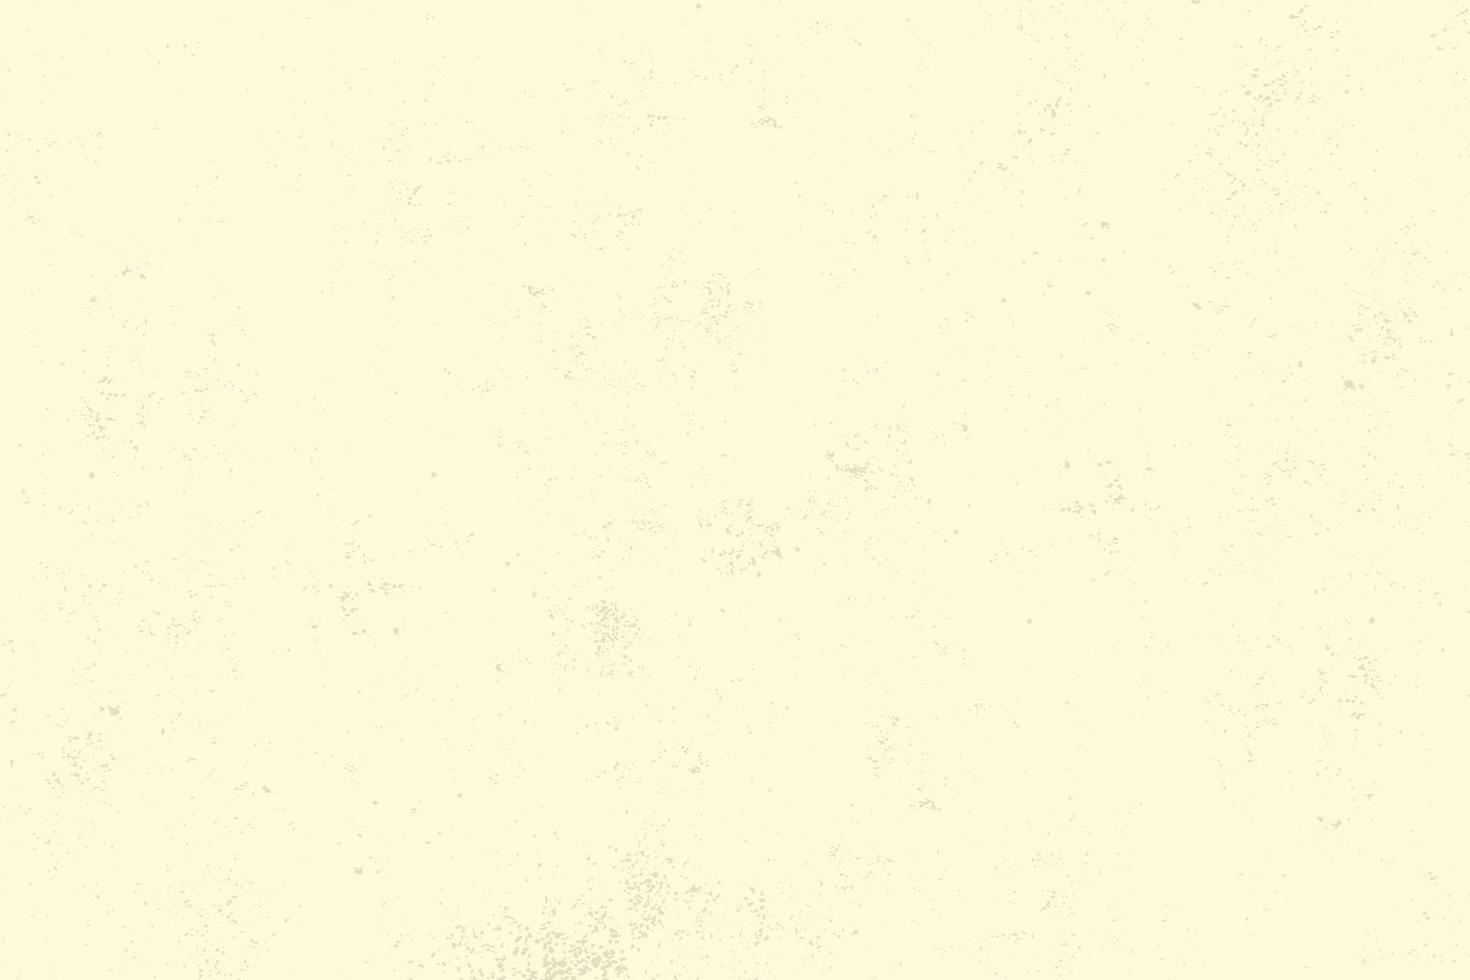 kraft paper yellow vintage background with dot, paper texture with copy space for design page book web. vector Illustration